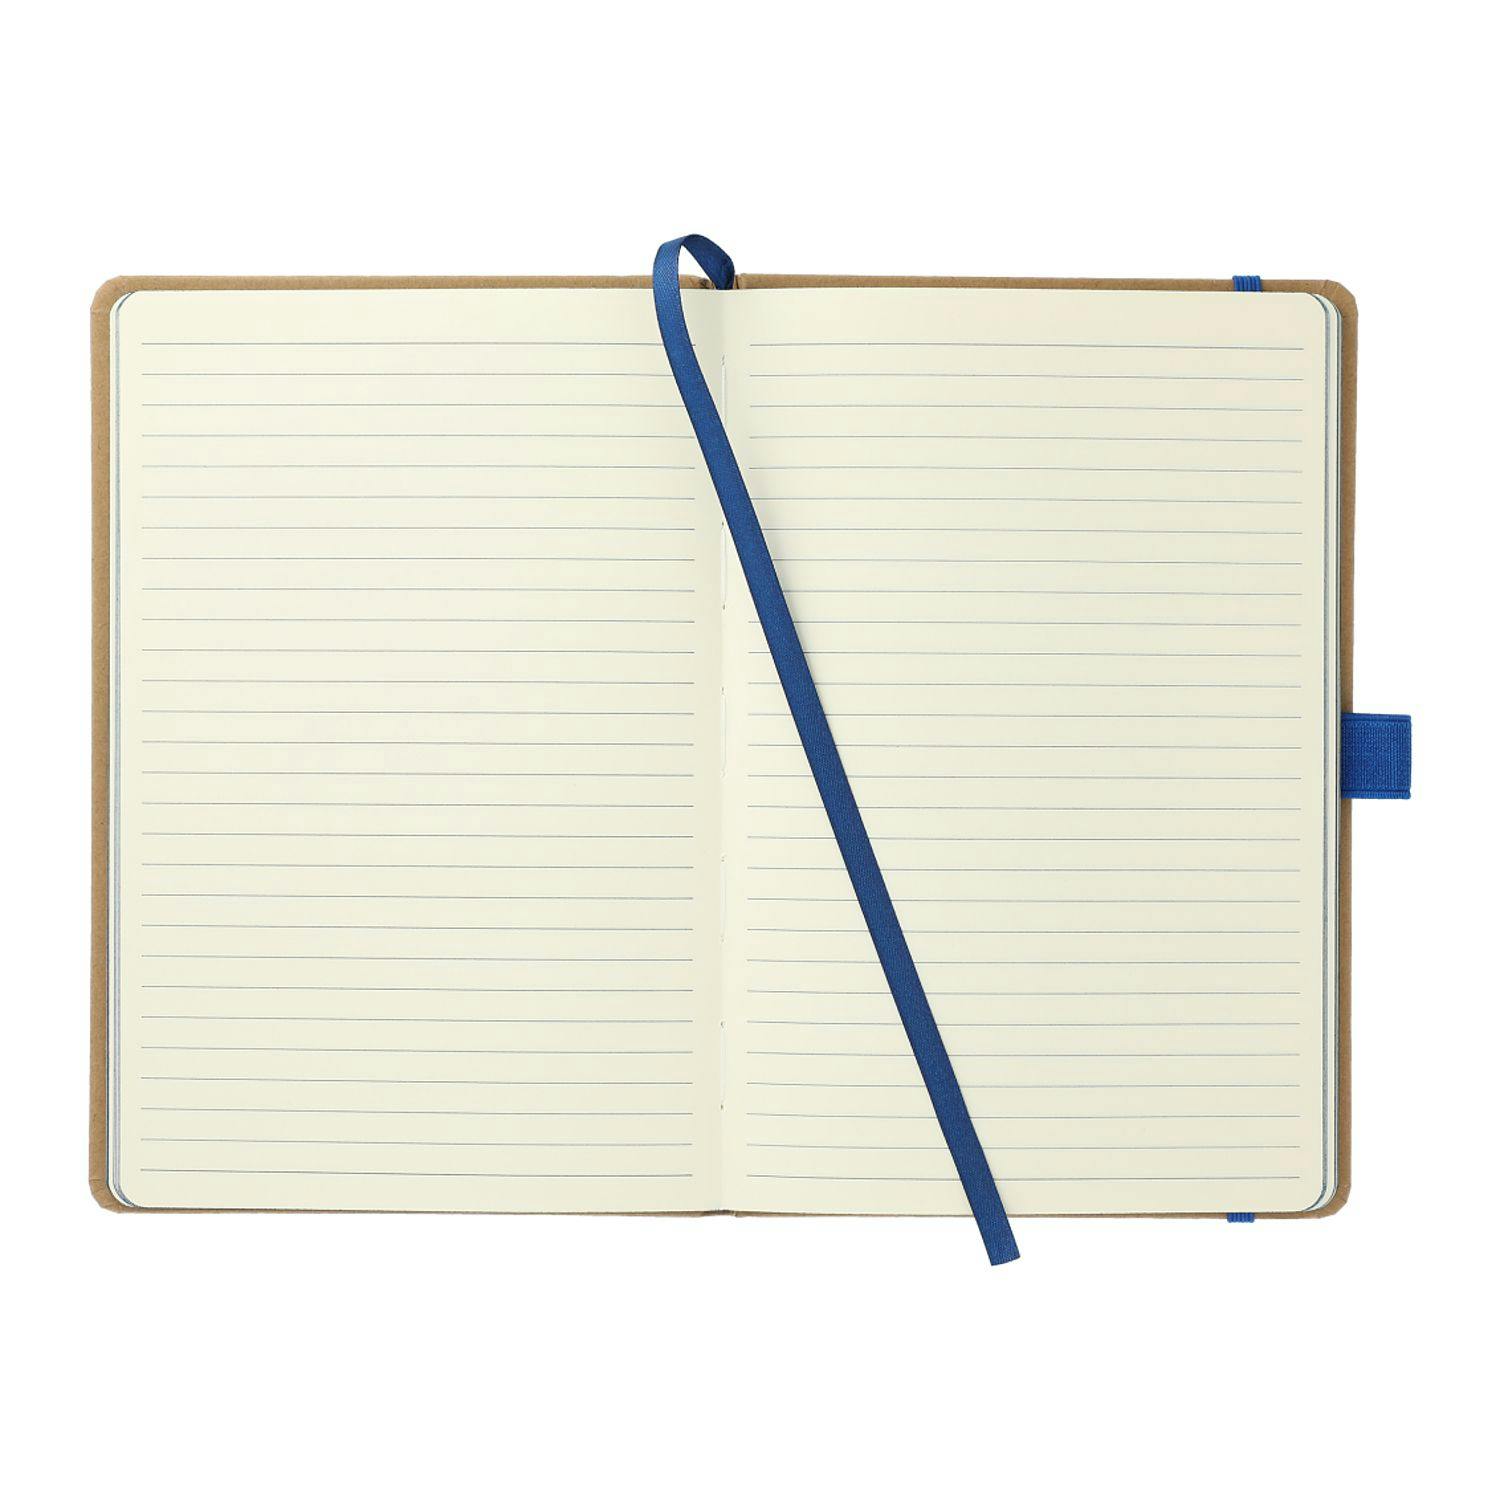 5.5" x 8.5" Eco Color Bound JournalBook® - additional Image 3